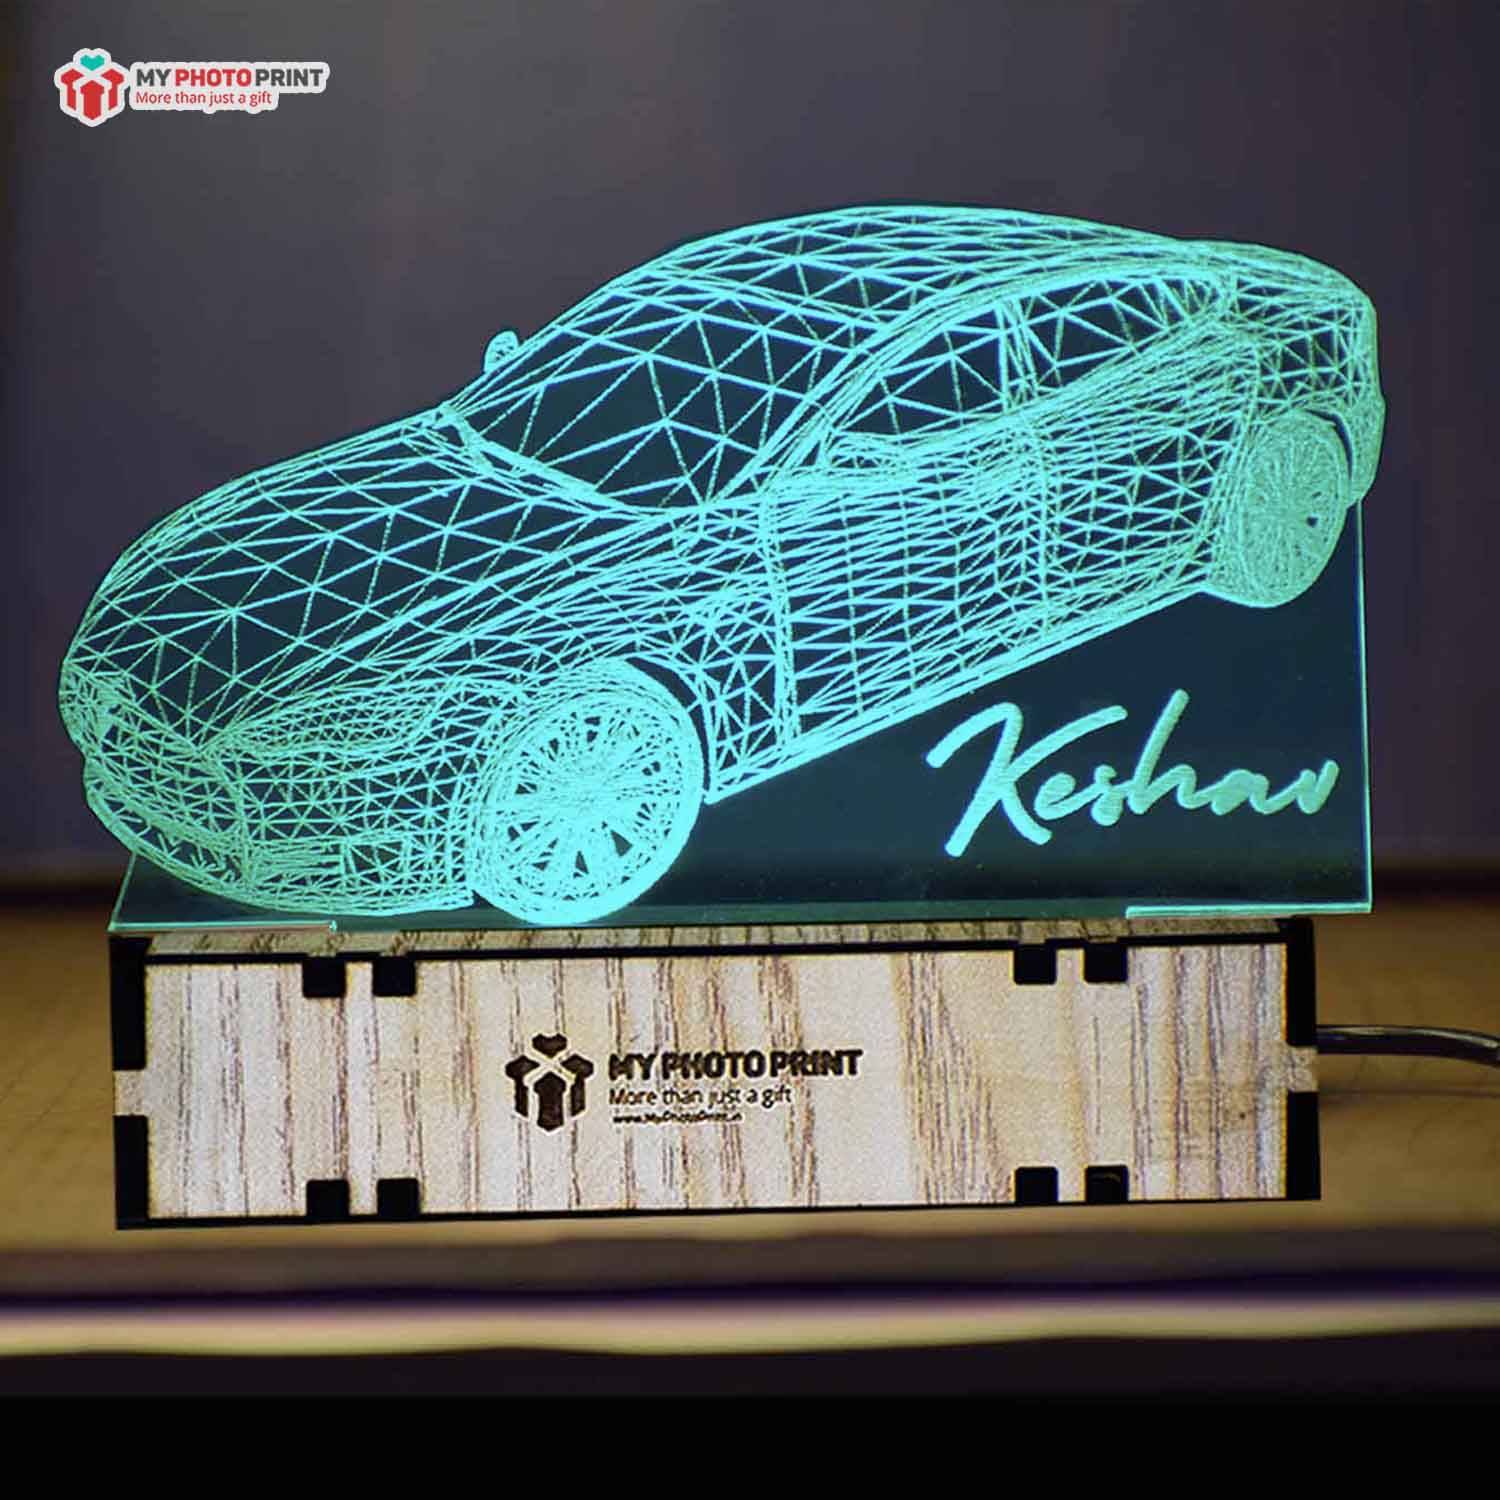 Personalized 3D Car Acrylic 3D illusion LED Lamp with Color Changing Led and Remote#1587